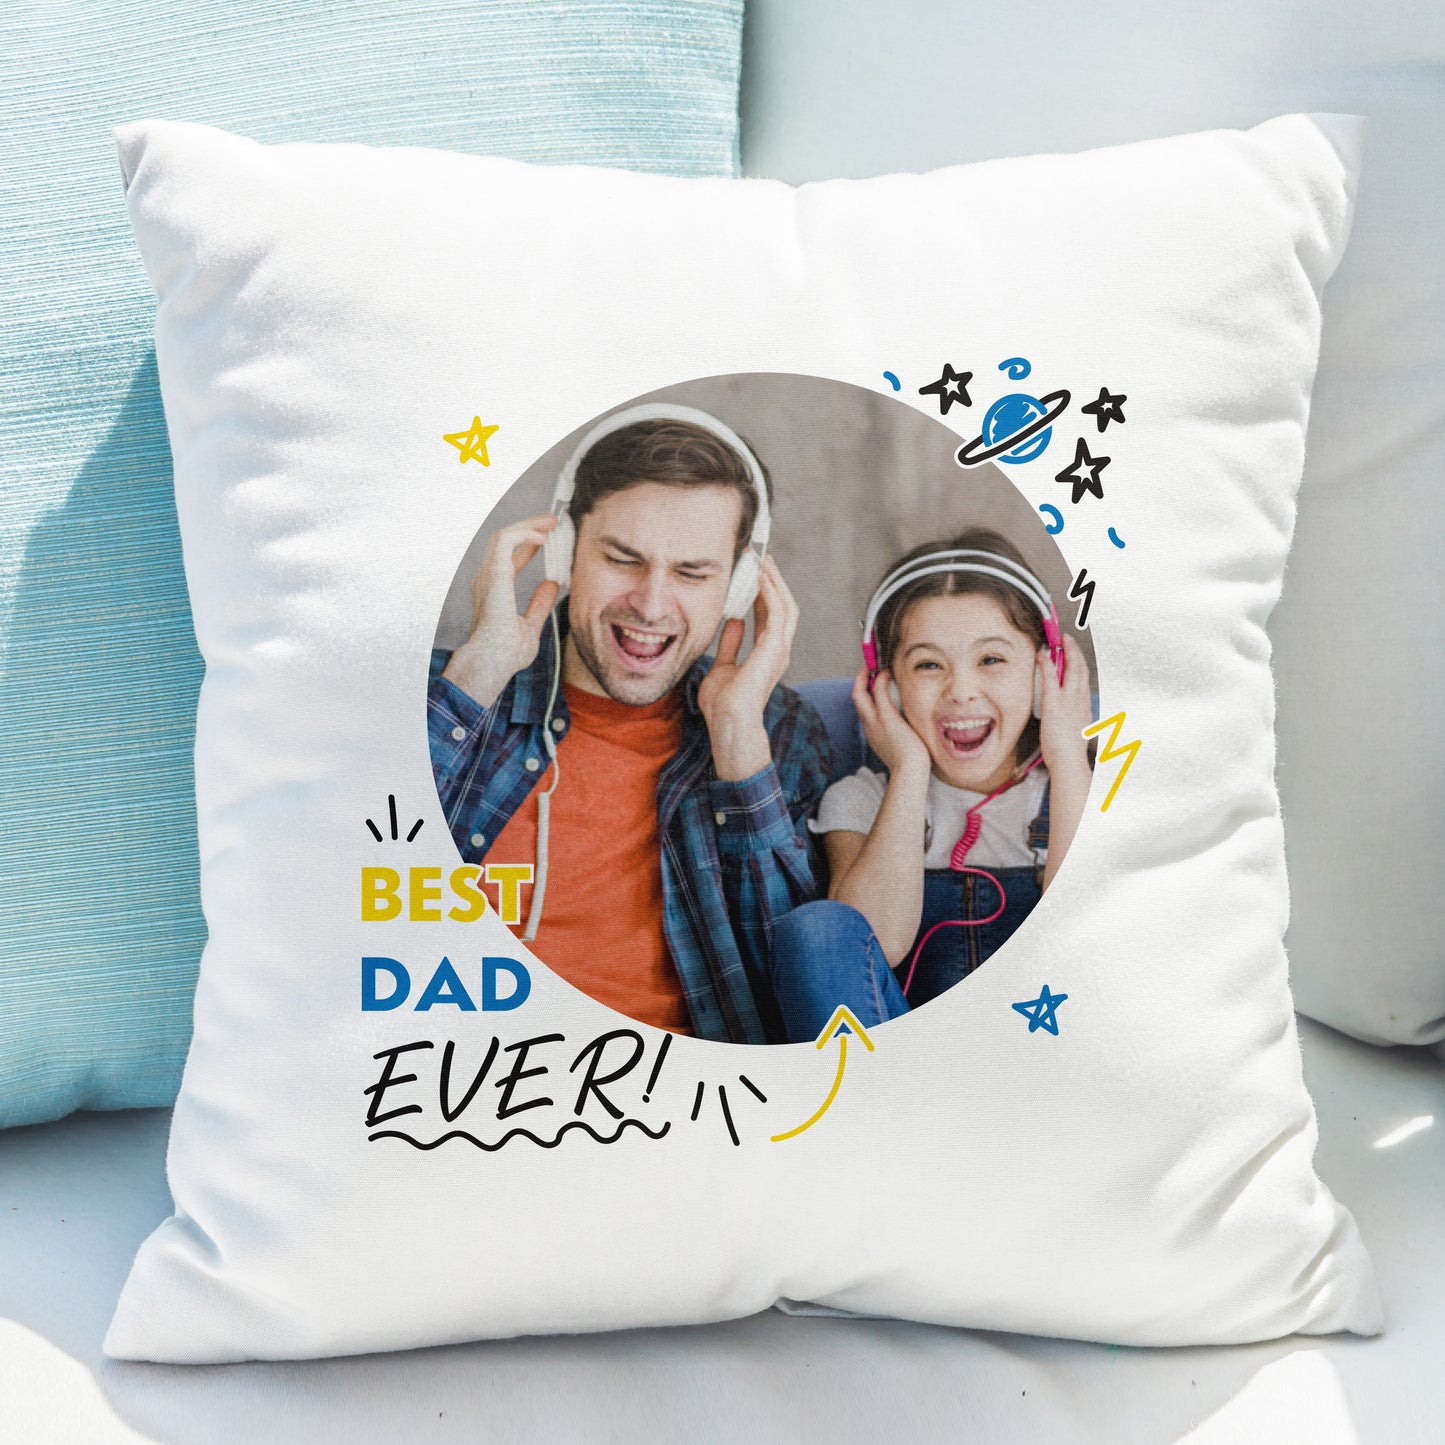 Personalised “Best………. Ever” Cushion - UPLOAD YOUR OWN PHOTO! - Violet Belle Gifts - Personalised “Best Ever” Cotton Cushion - UPLOAD YOUR OWN PHOTO!